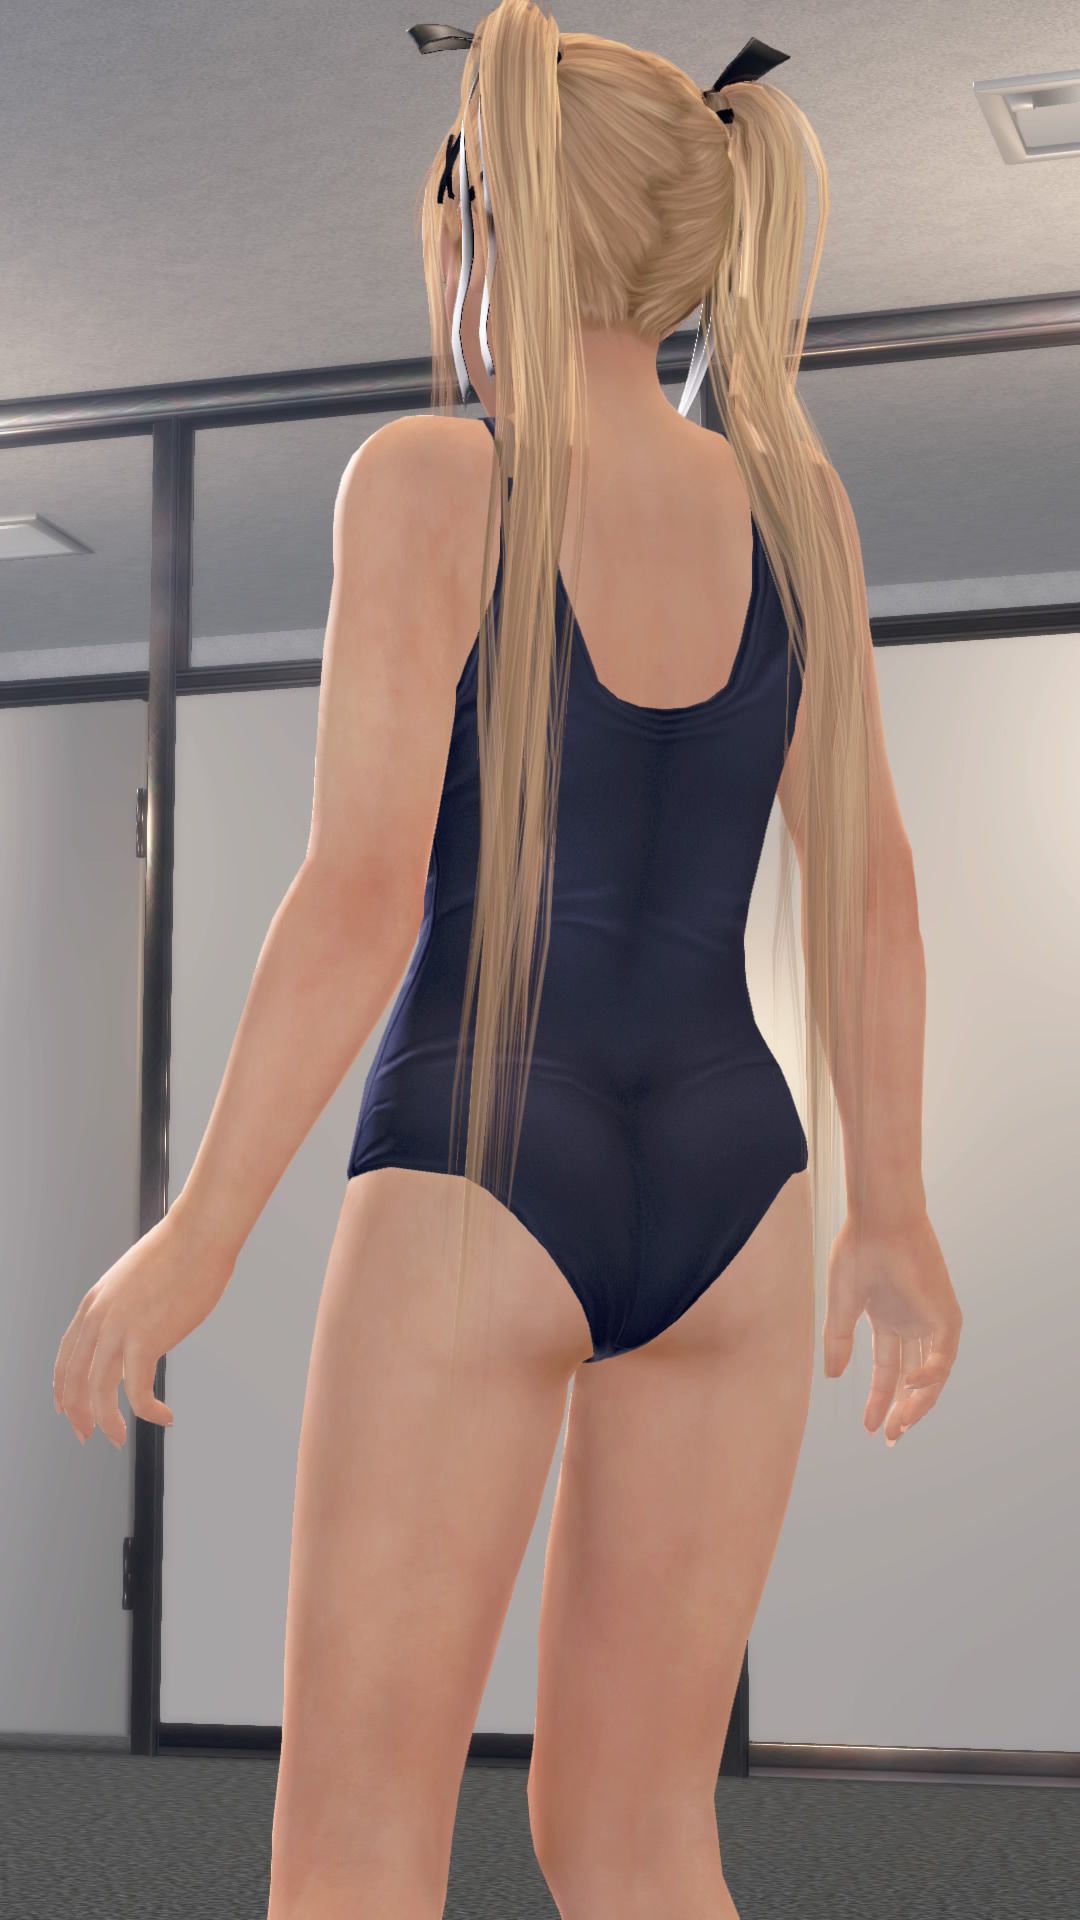 DOAX3 recommend private shooting Association (Division of Rose-Marie) in swimsuit 22